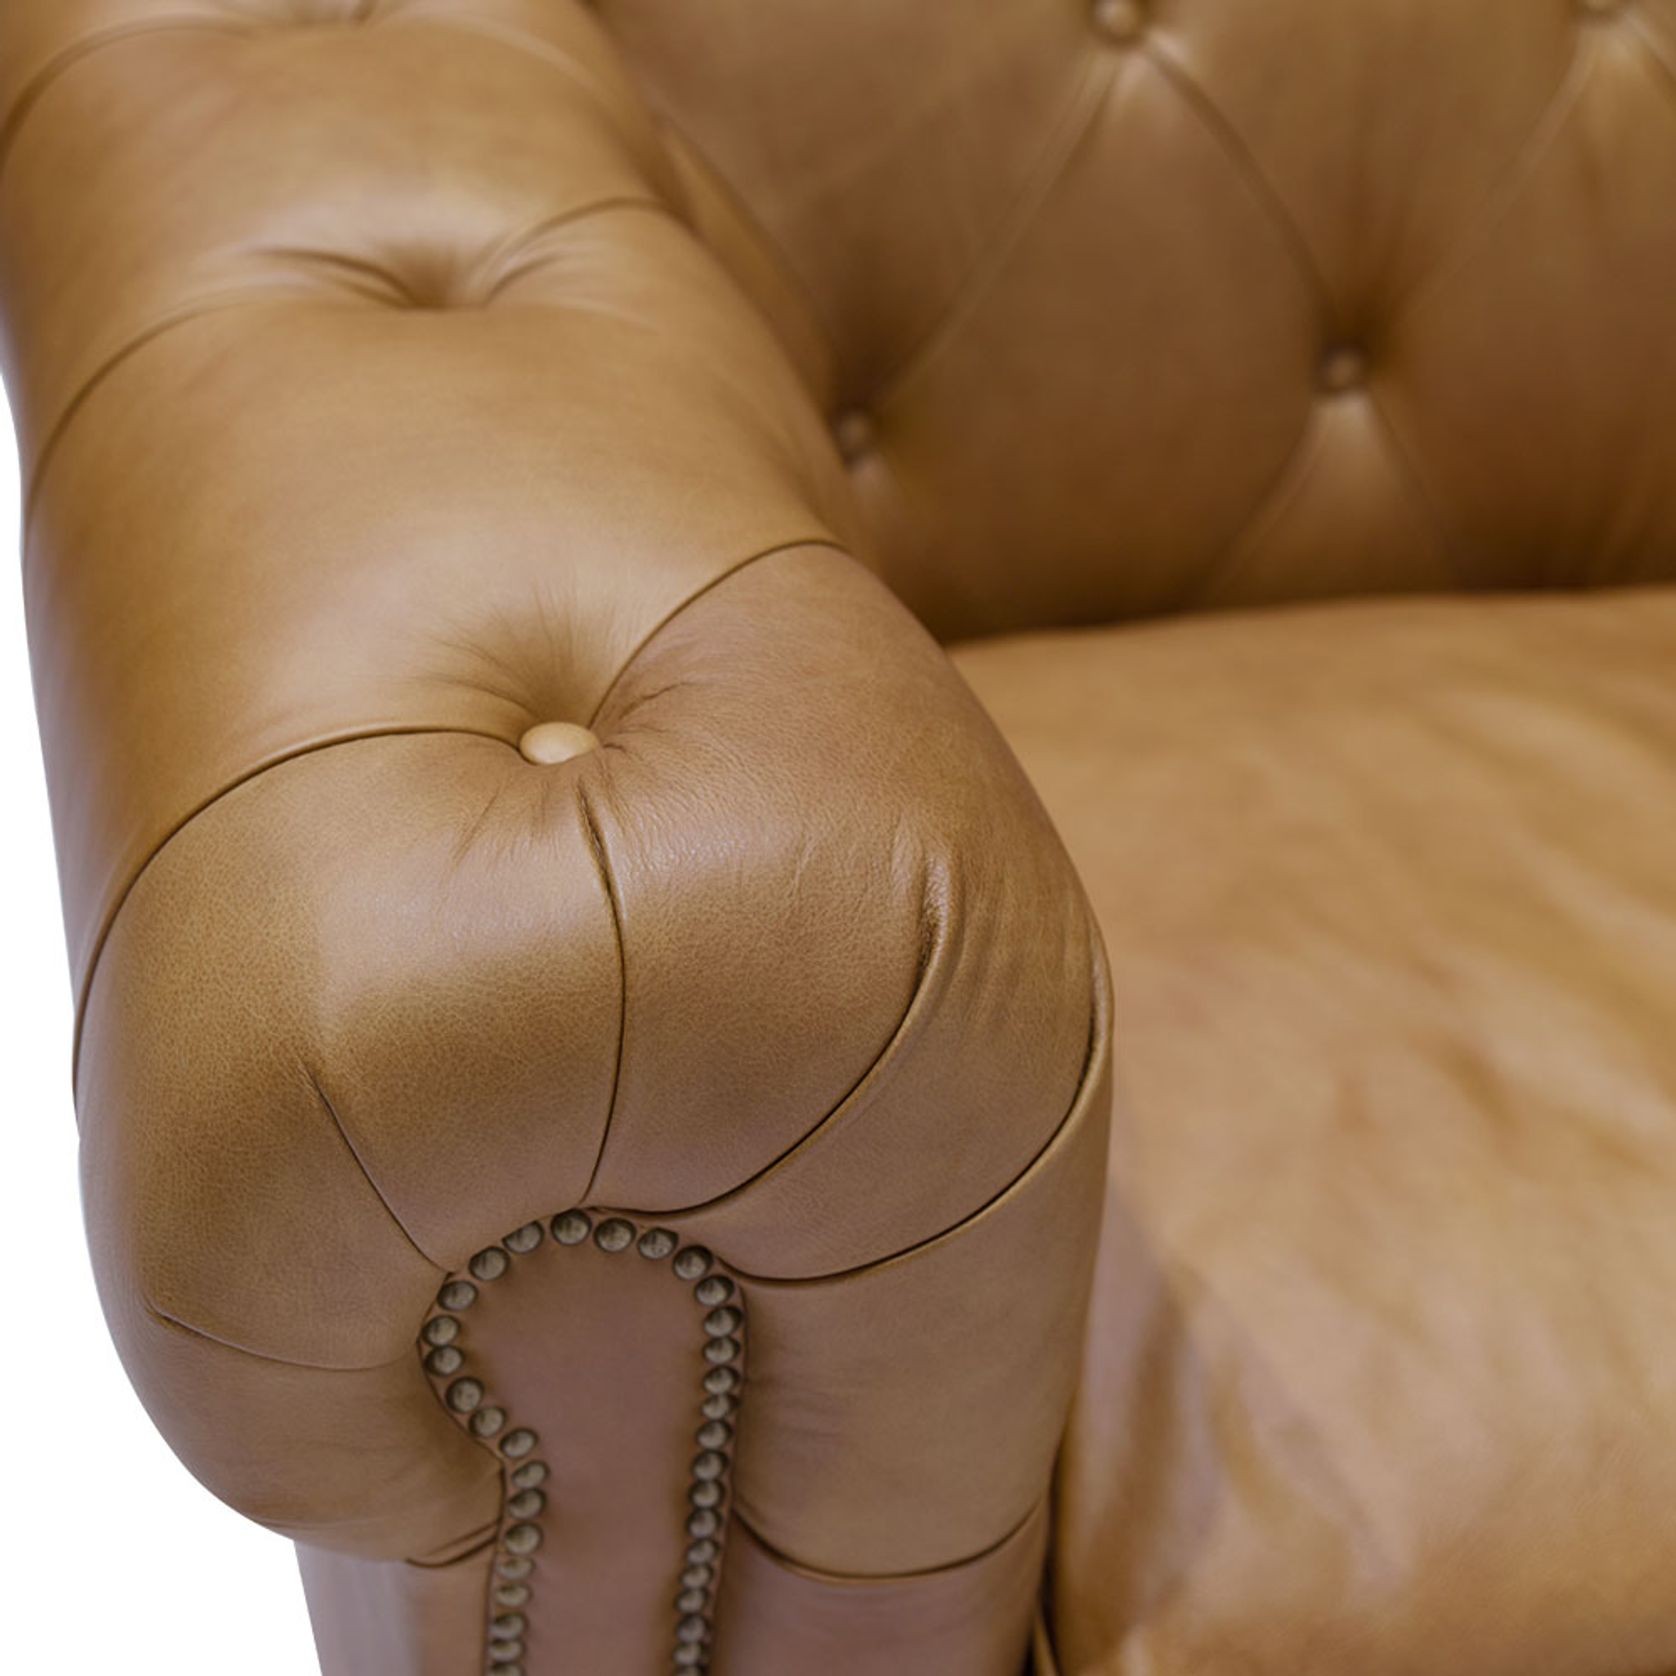 Stanhope Italian Leather Chesterfield - 2 Seater Camel gallery detail image